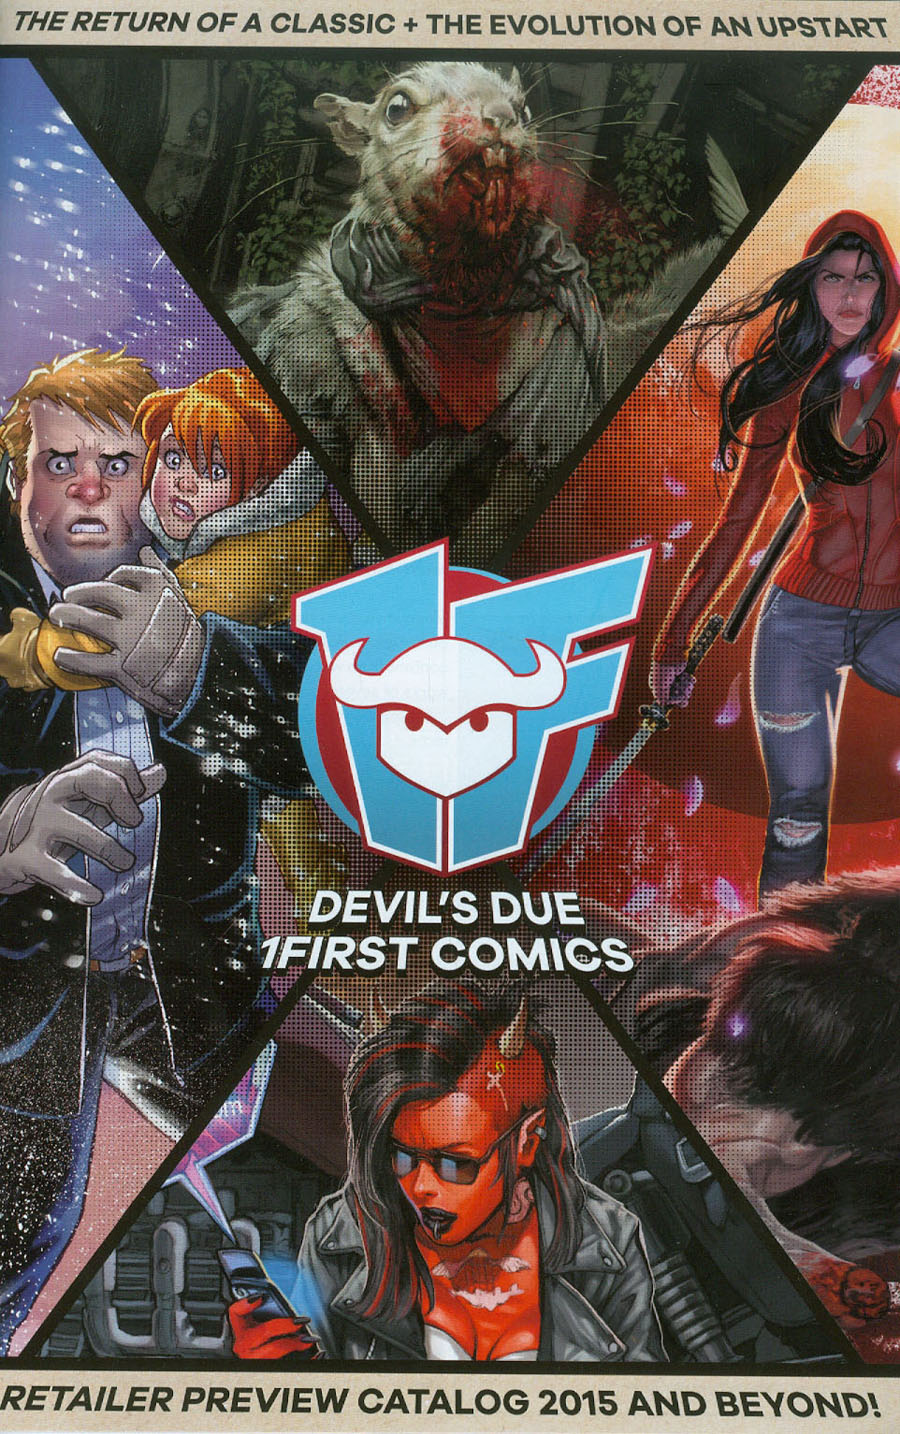 Devils Due 1First Comics Retailer Preview Catalogue 2015 And Beyond